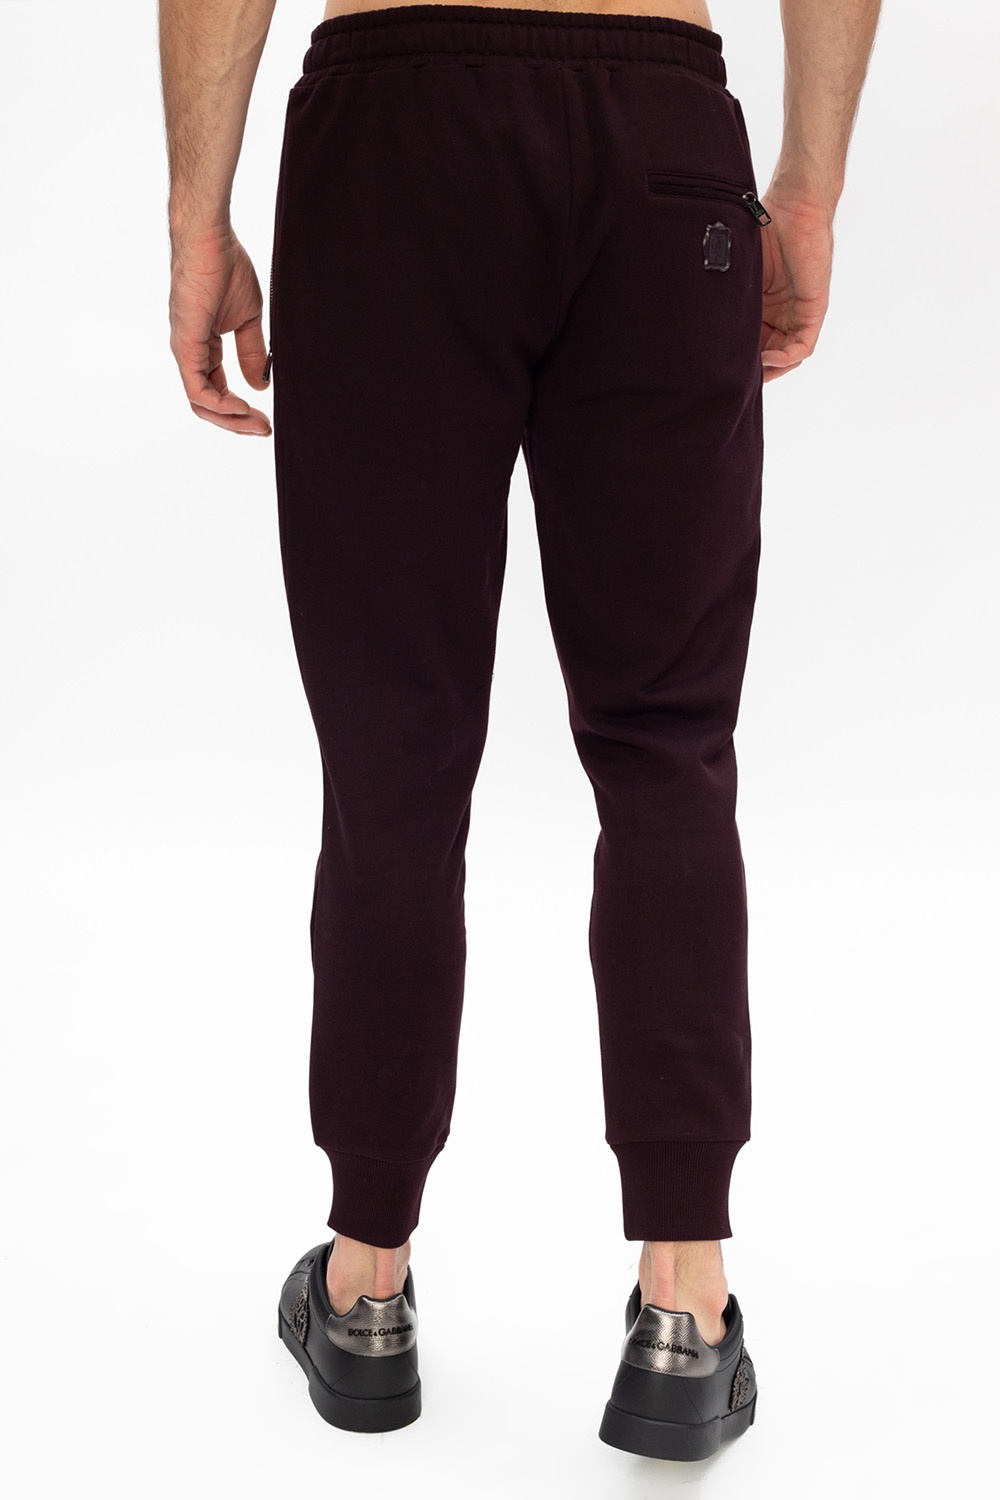 Dolce & Gabbana small Sicily top-handle bag Branded sweatpants